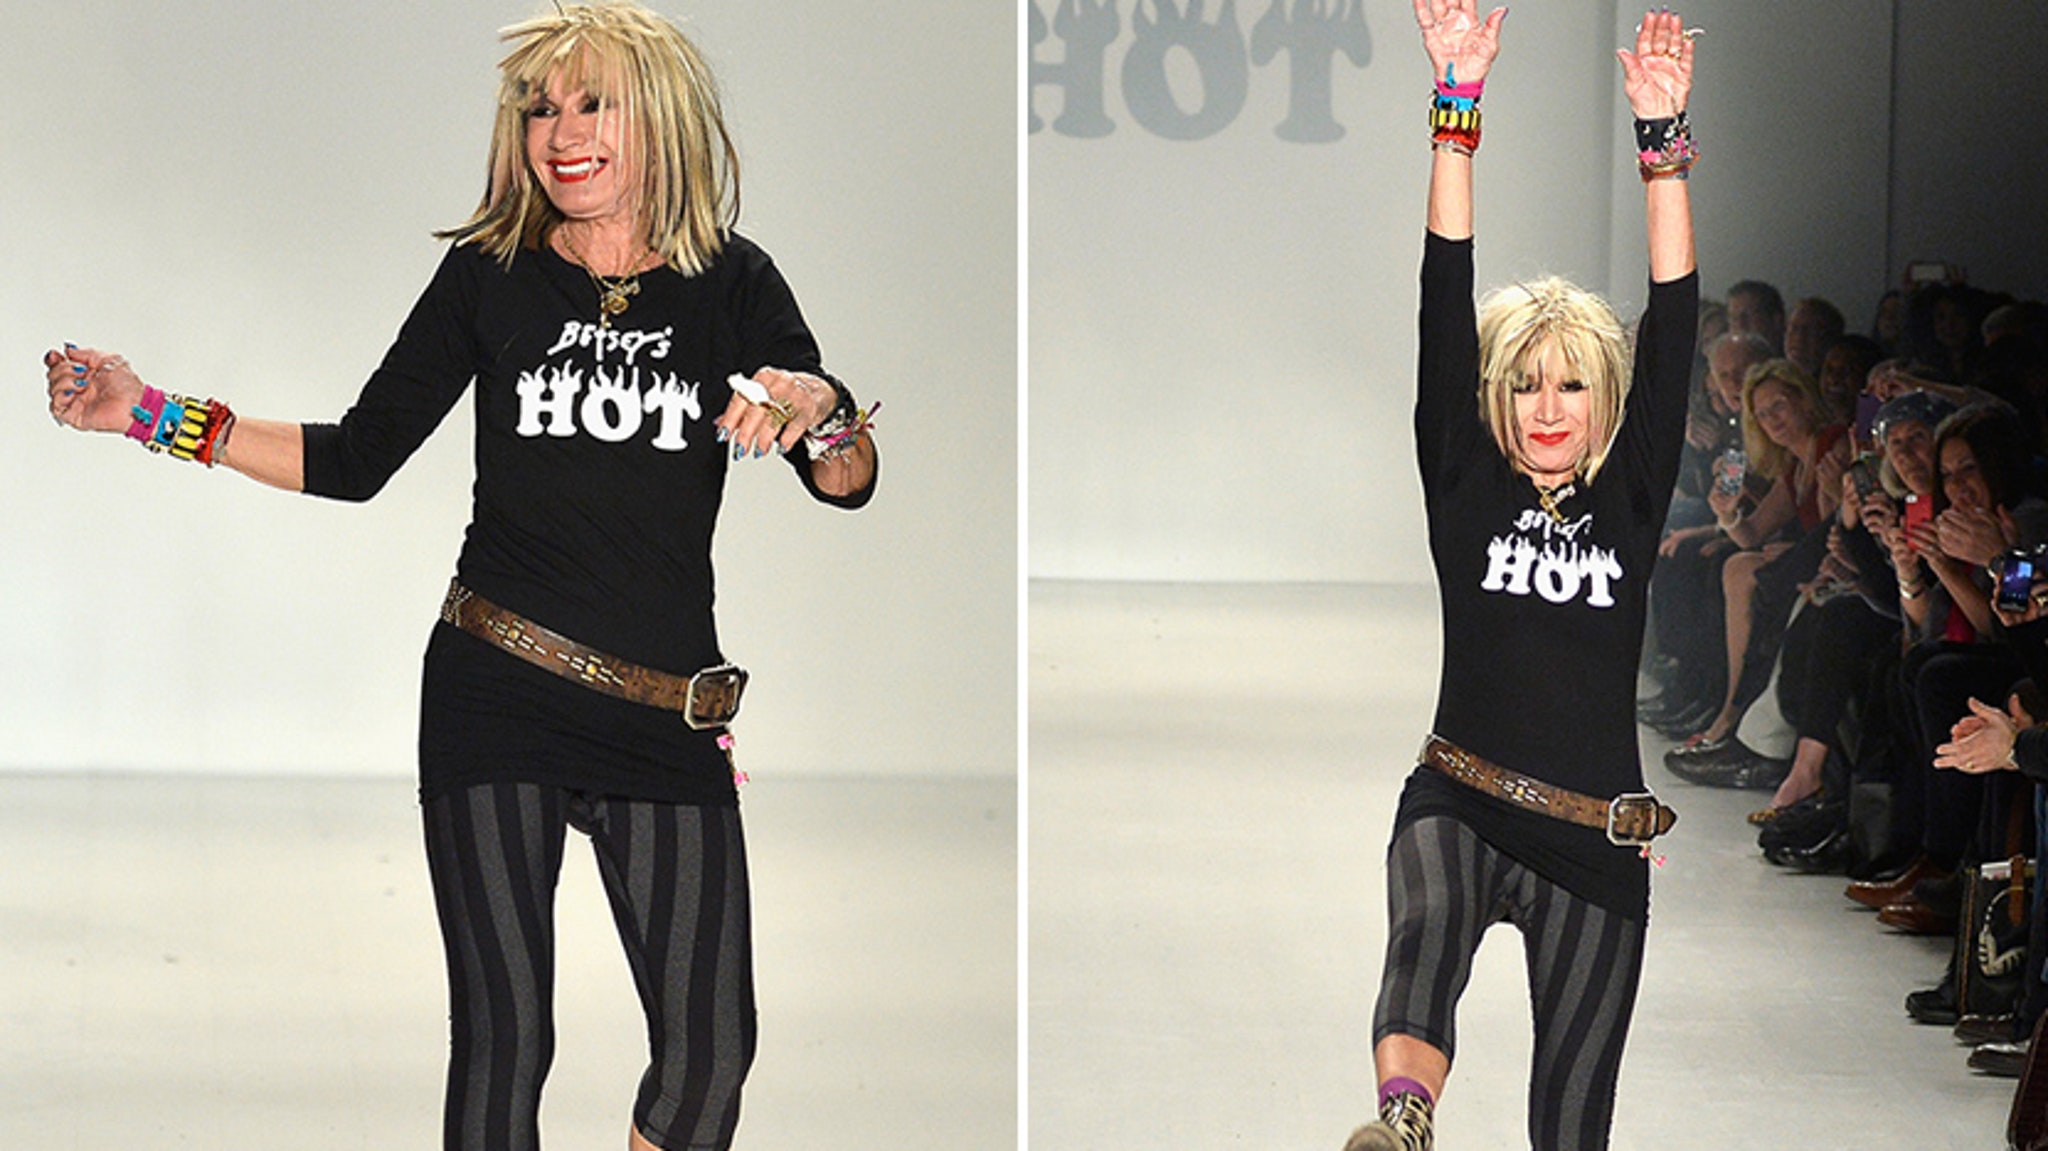 Behind the Scenes With Betsey Johnson at Style Fashion Week L.A.